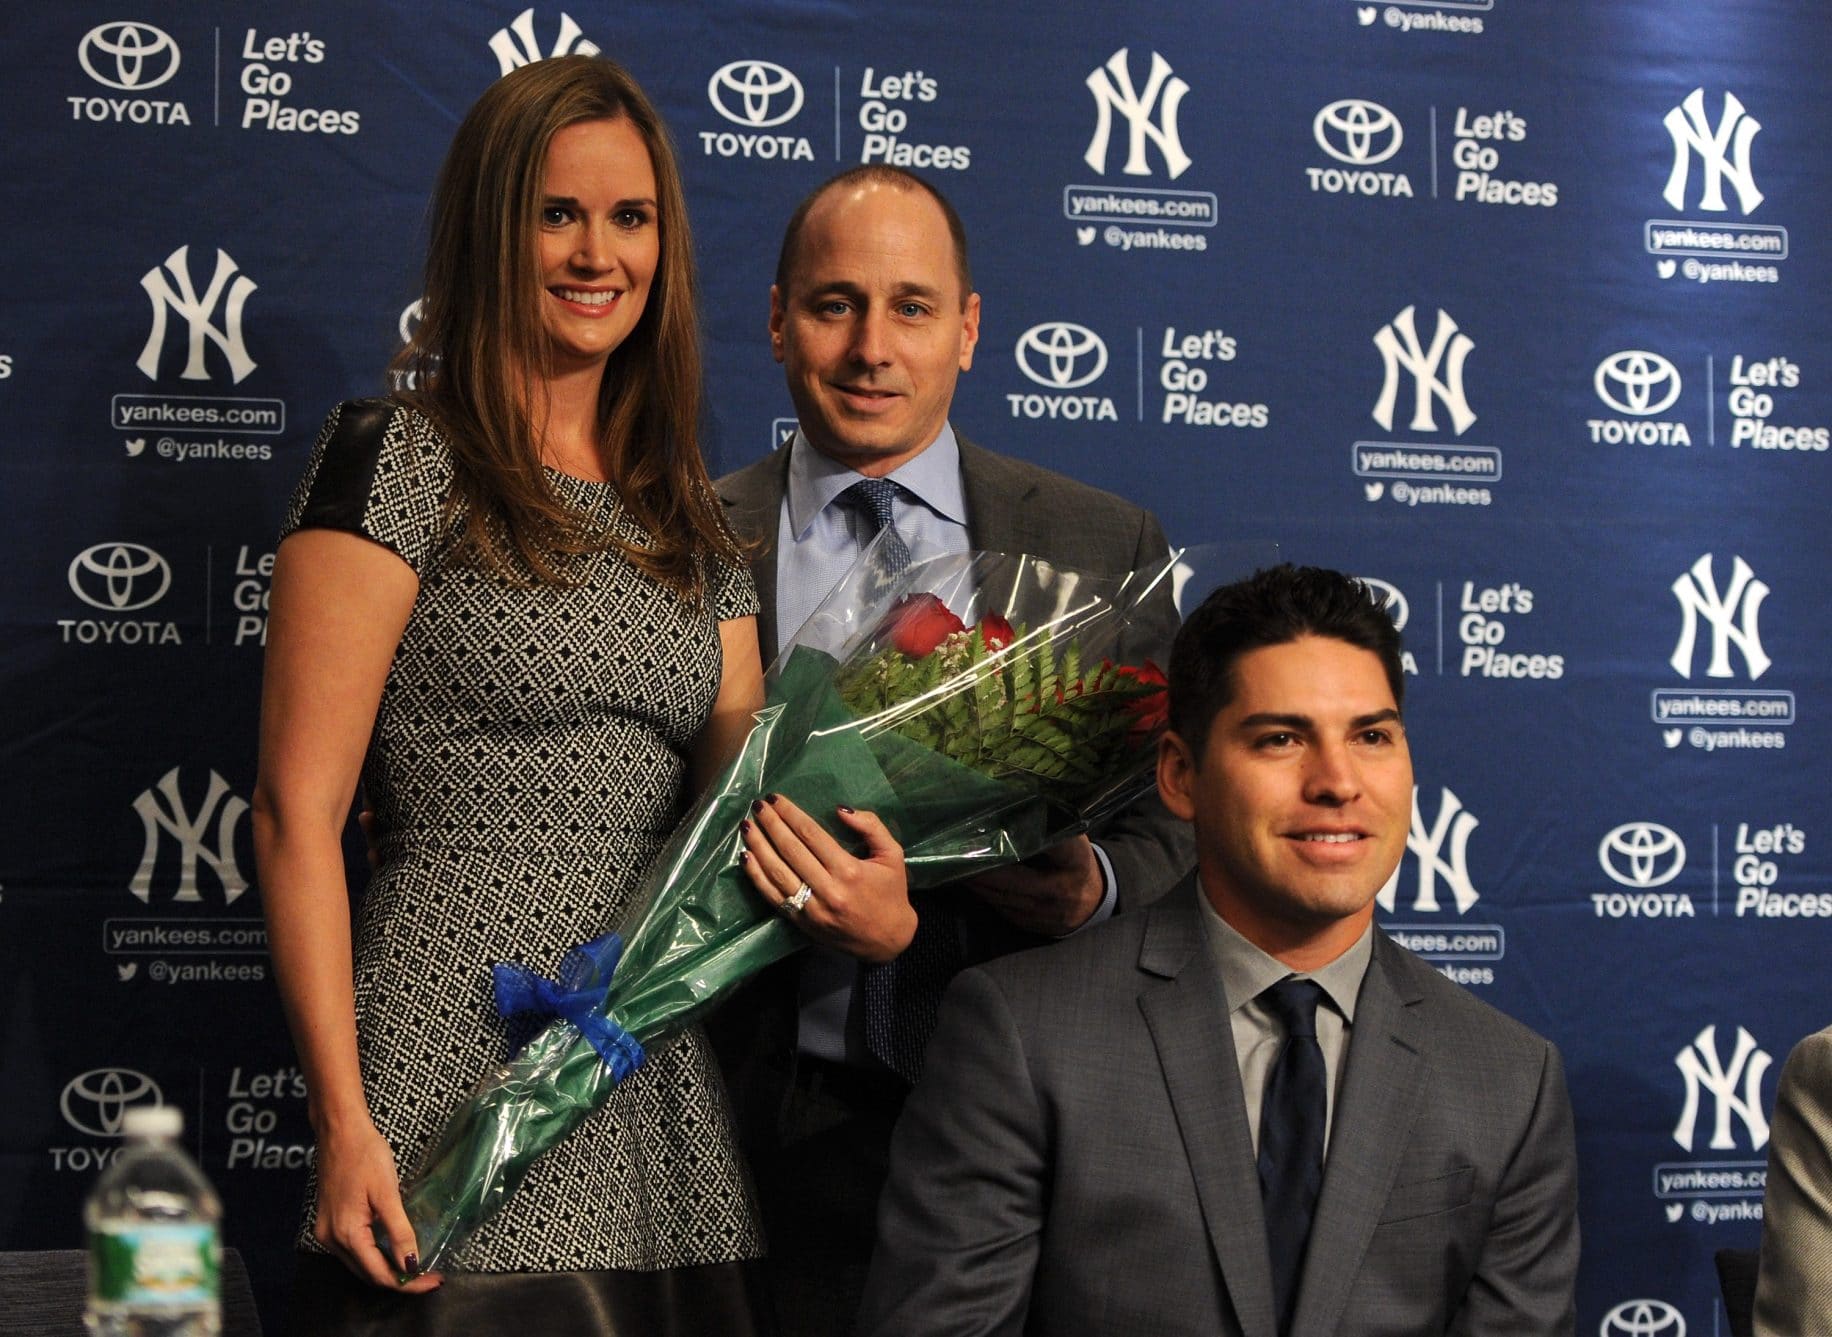 In happier days (2013), the Yankees introduce Jacoby Ellsbury